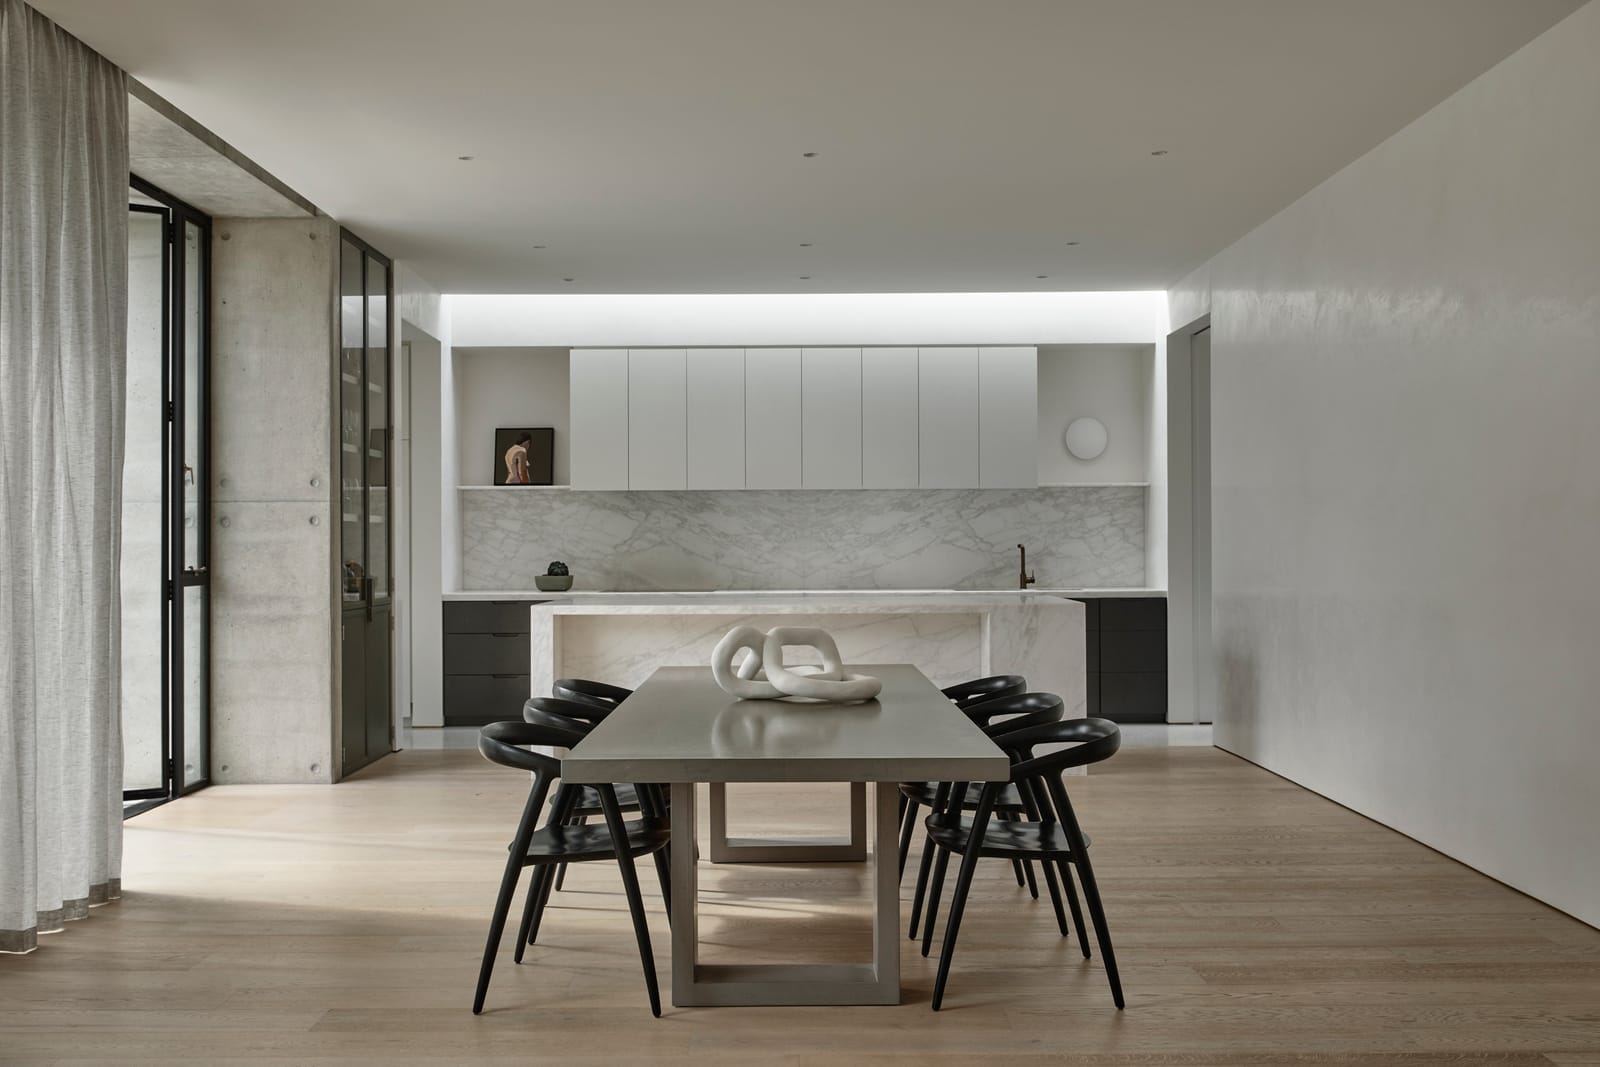 RE Residence by Inglis Architects.The first image shows a spacious and modern dining area within a minimalist kitchen setting. A simple wooden dining table is paired with black chairs, situated on light wooden flooring. White cabinetry and a kitchen counter with a marble finish define the kitchen space in the background, with a glimpse of a hallway to the left, featuring a concrete wall.